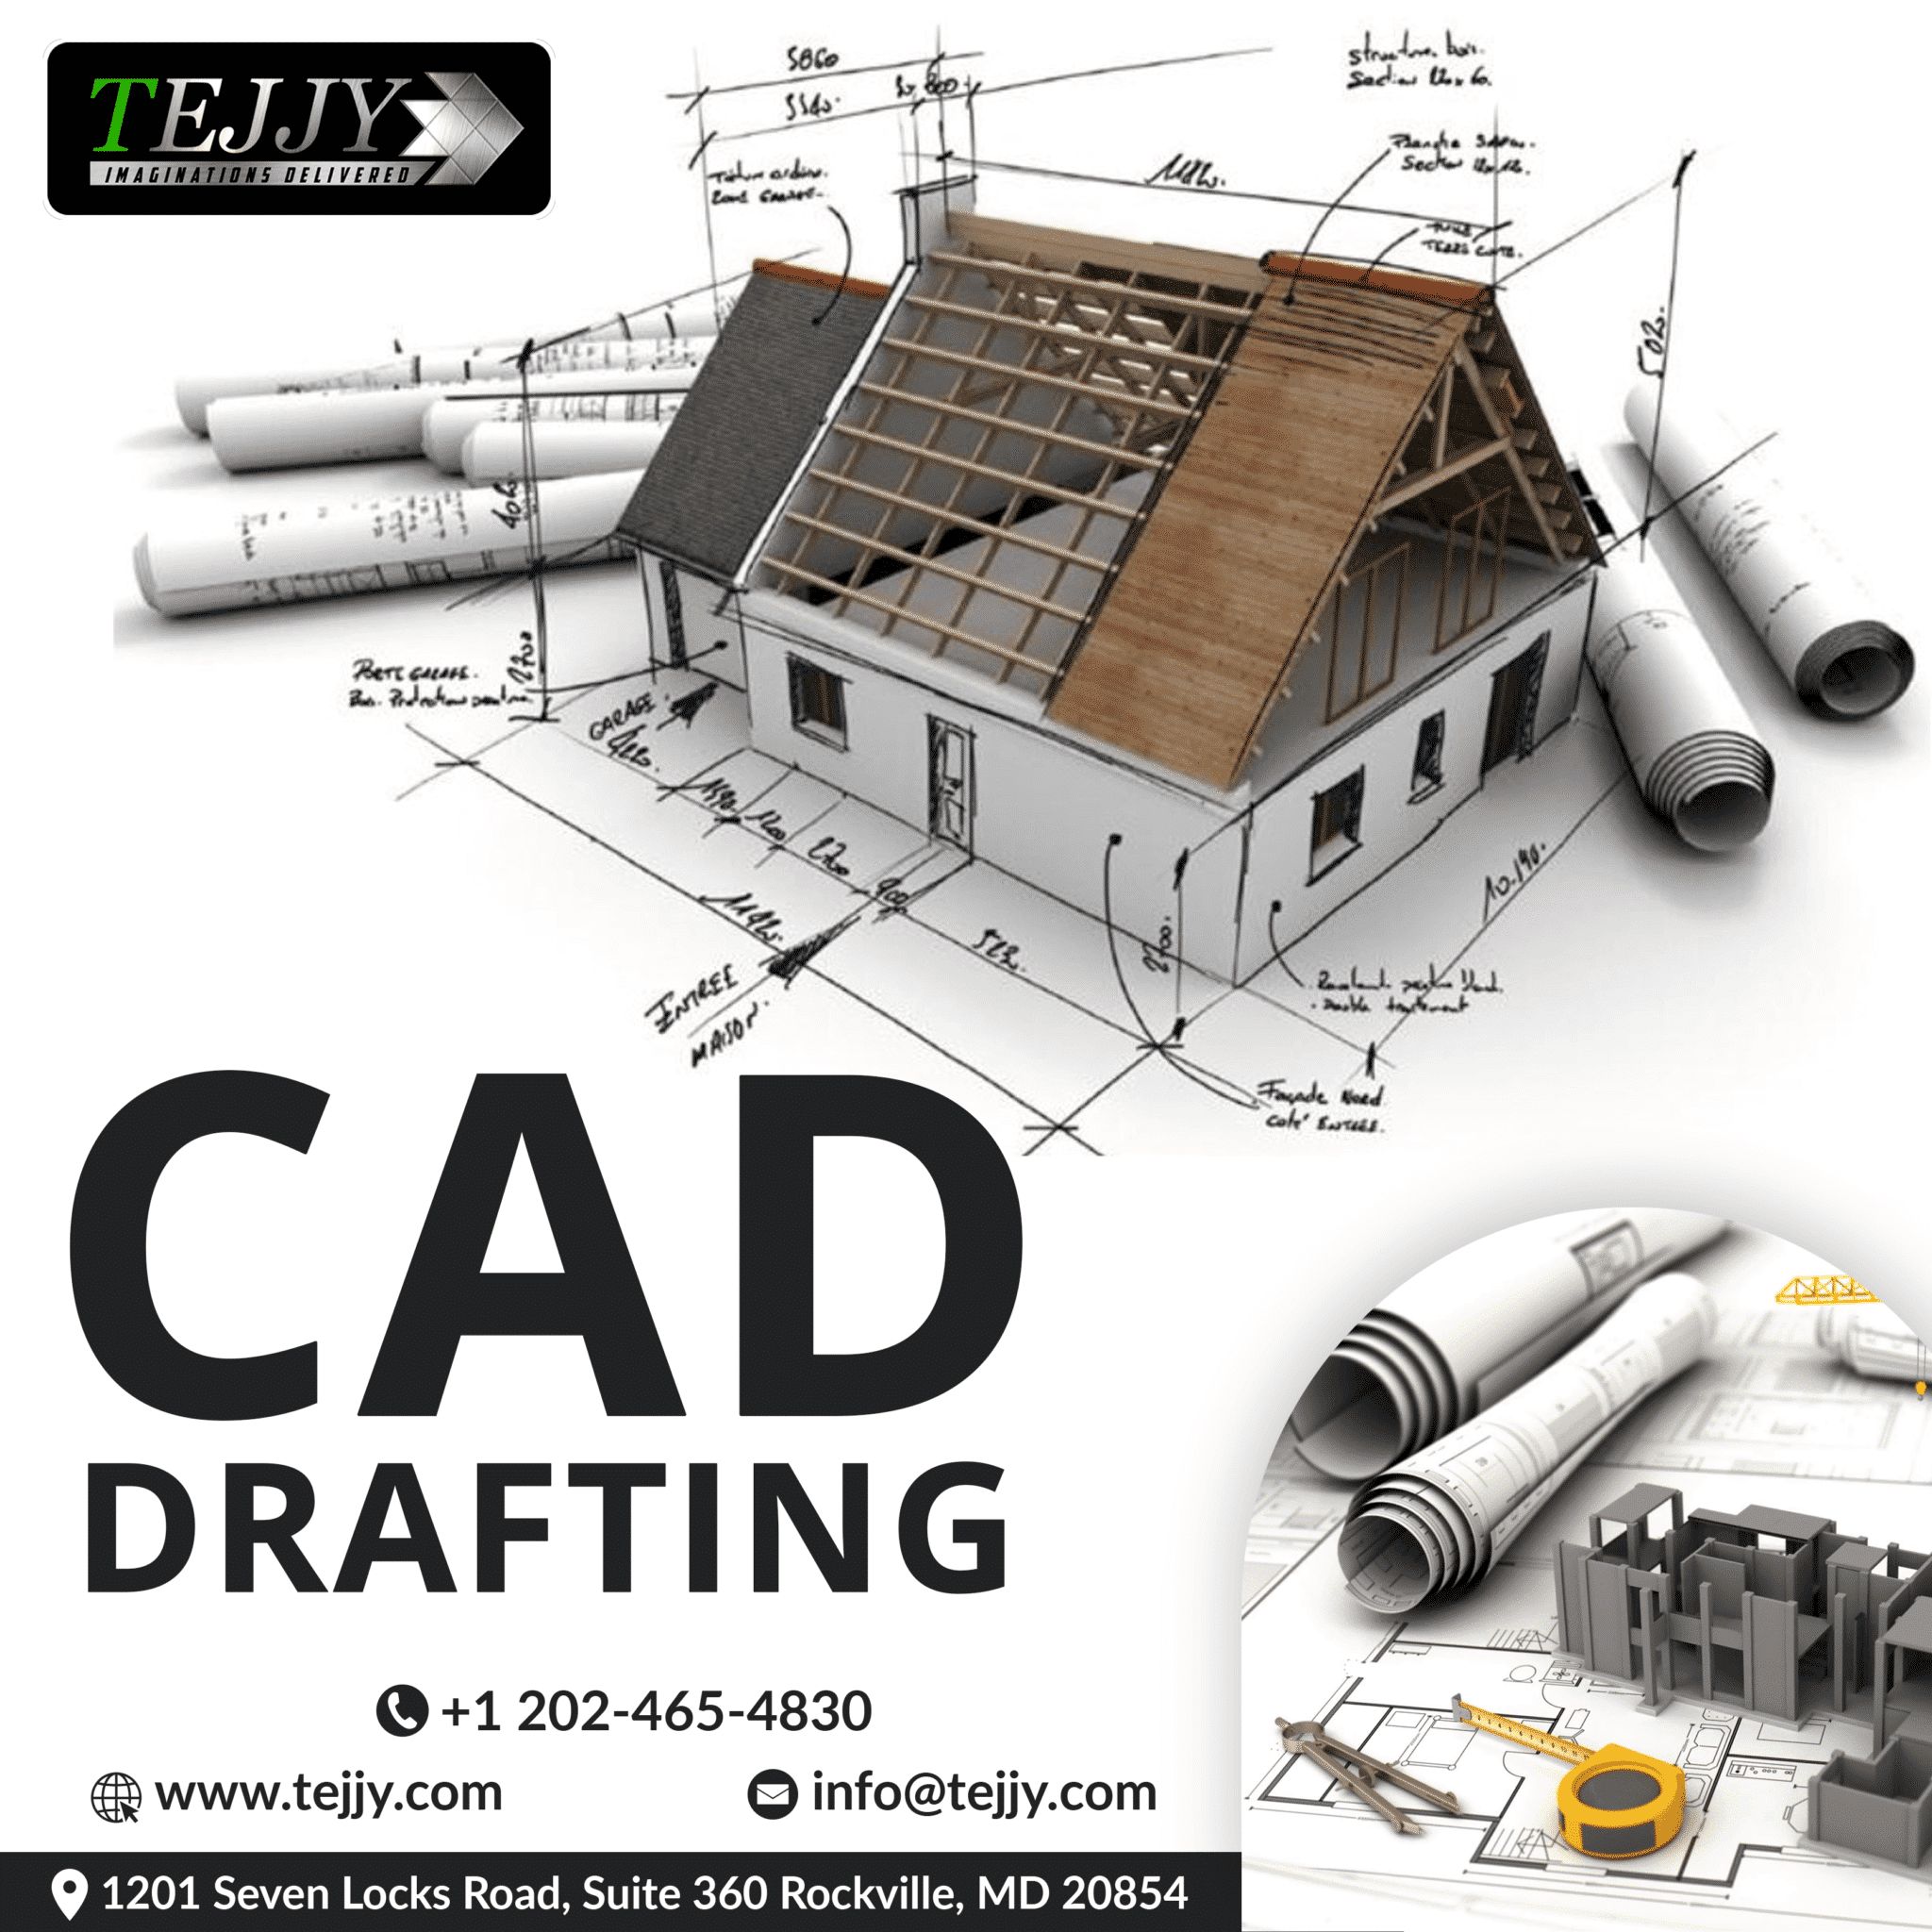 CAD Drafting Services in Baltimore, MD, VA, DC, USA